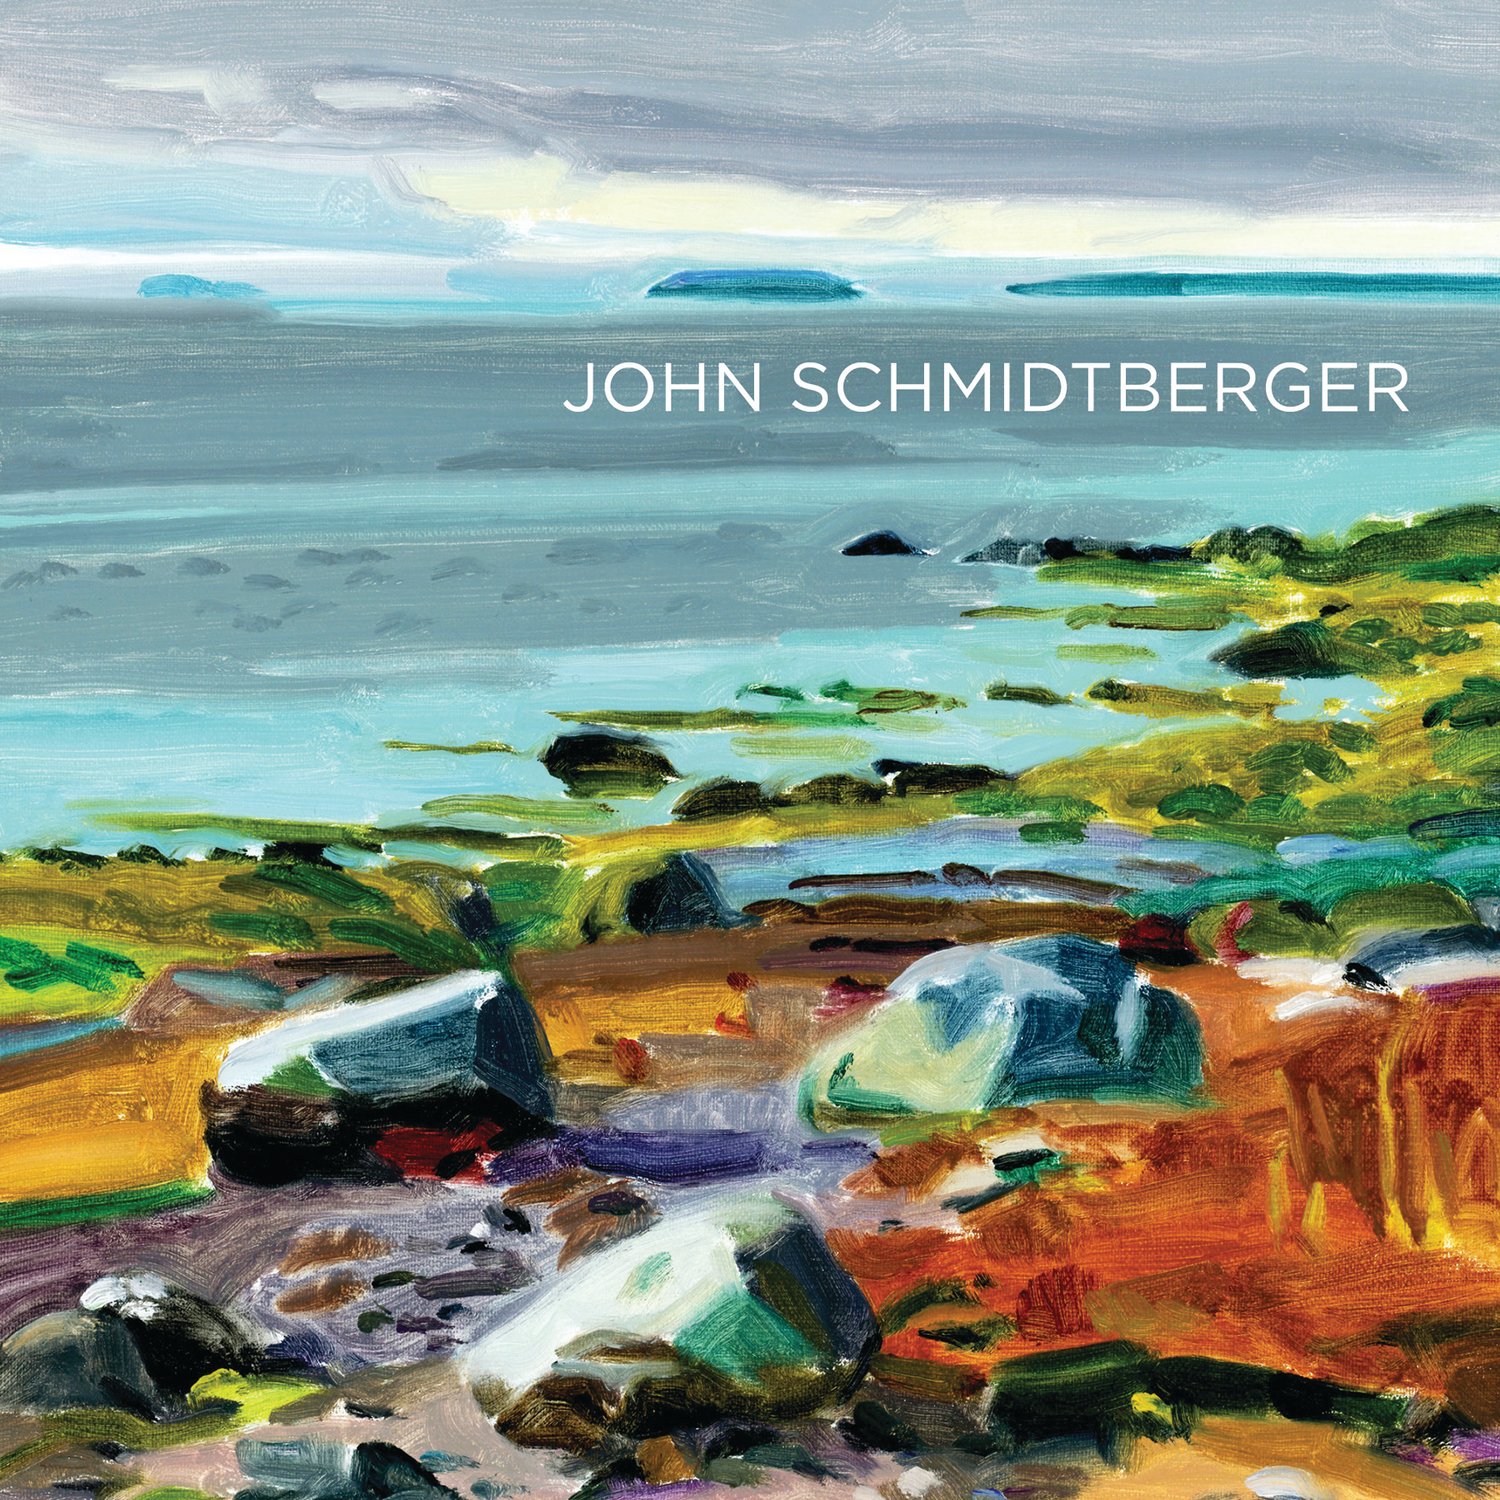 The cover of John Schmidtberger’s artist book features one of his paintings.